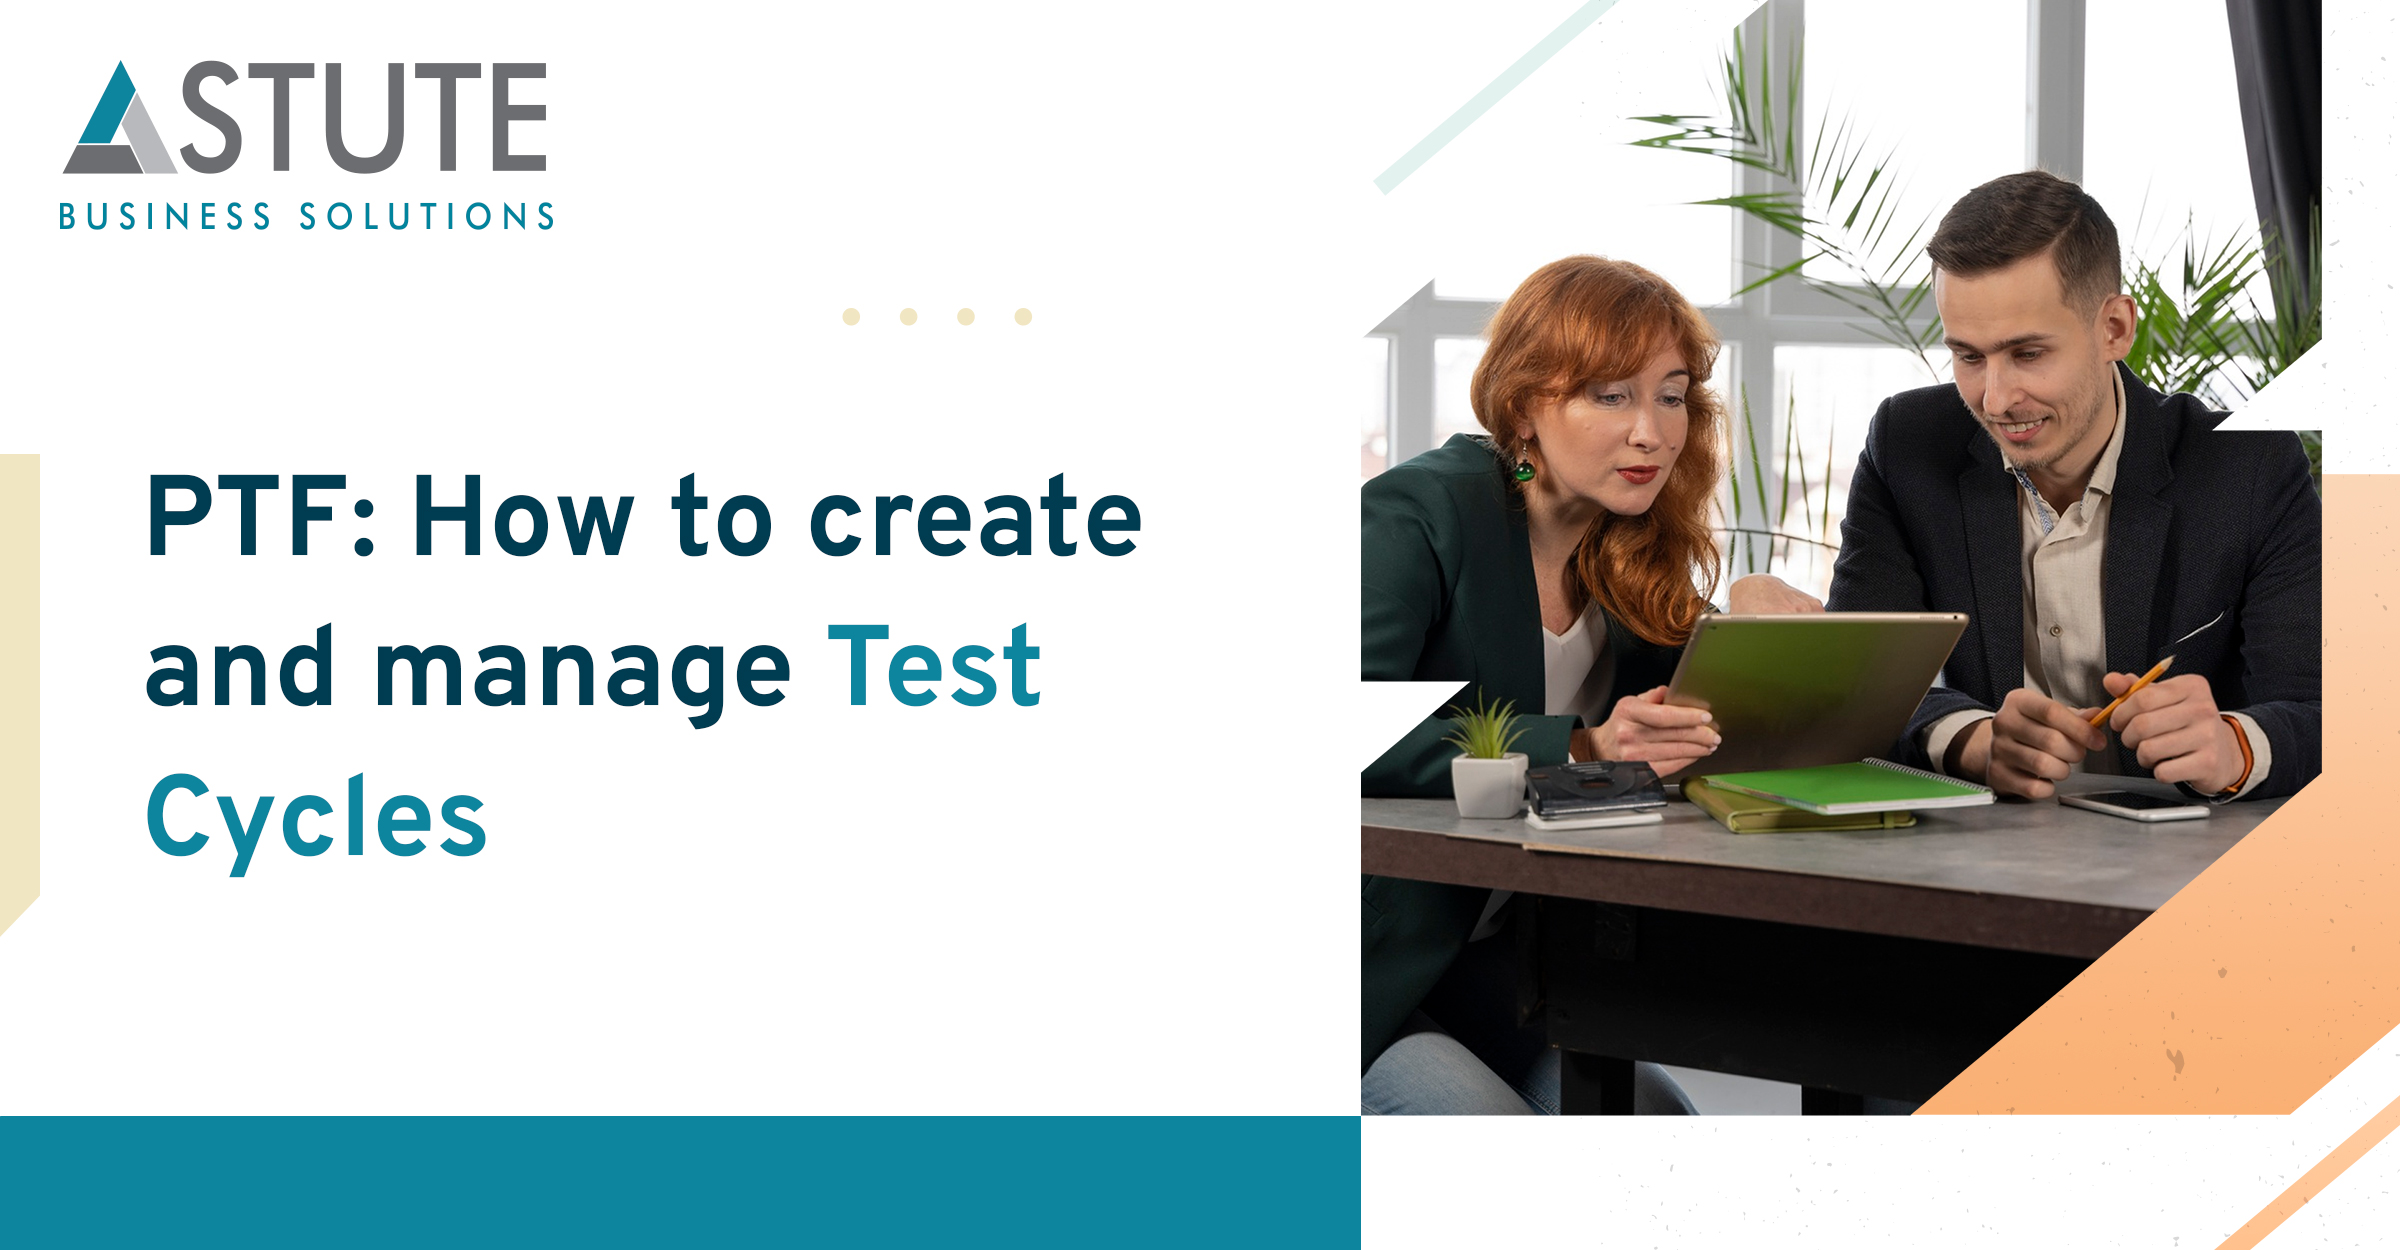 PTF: How to create and manage Test Cycles